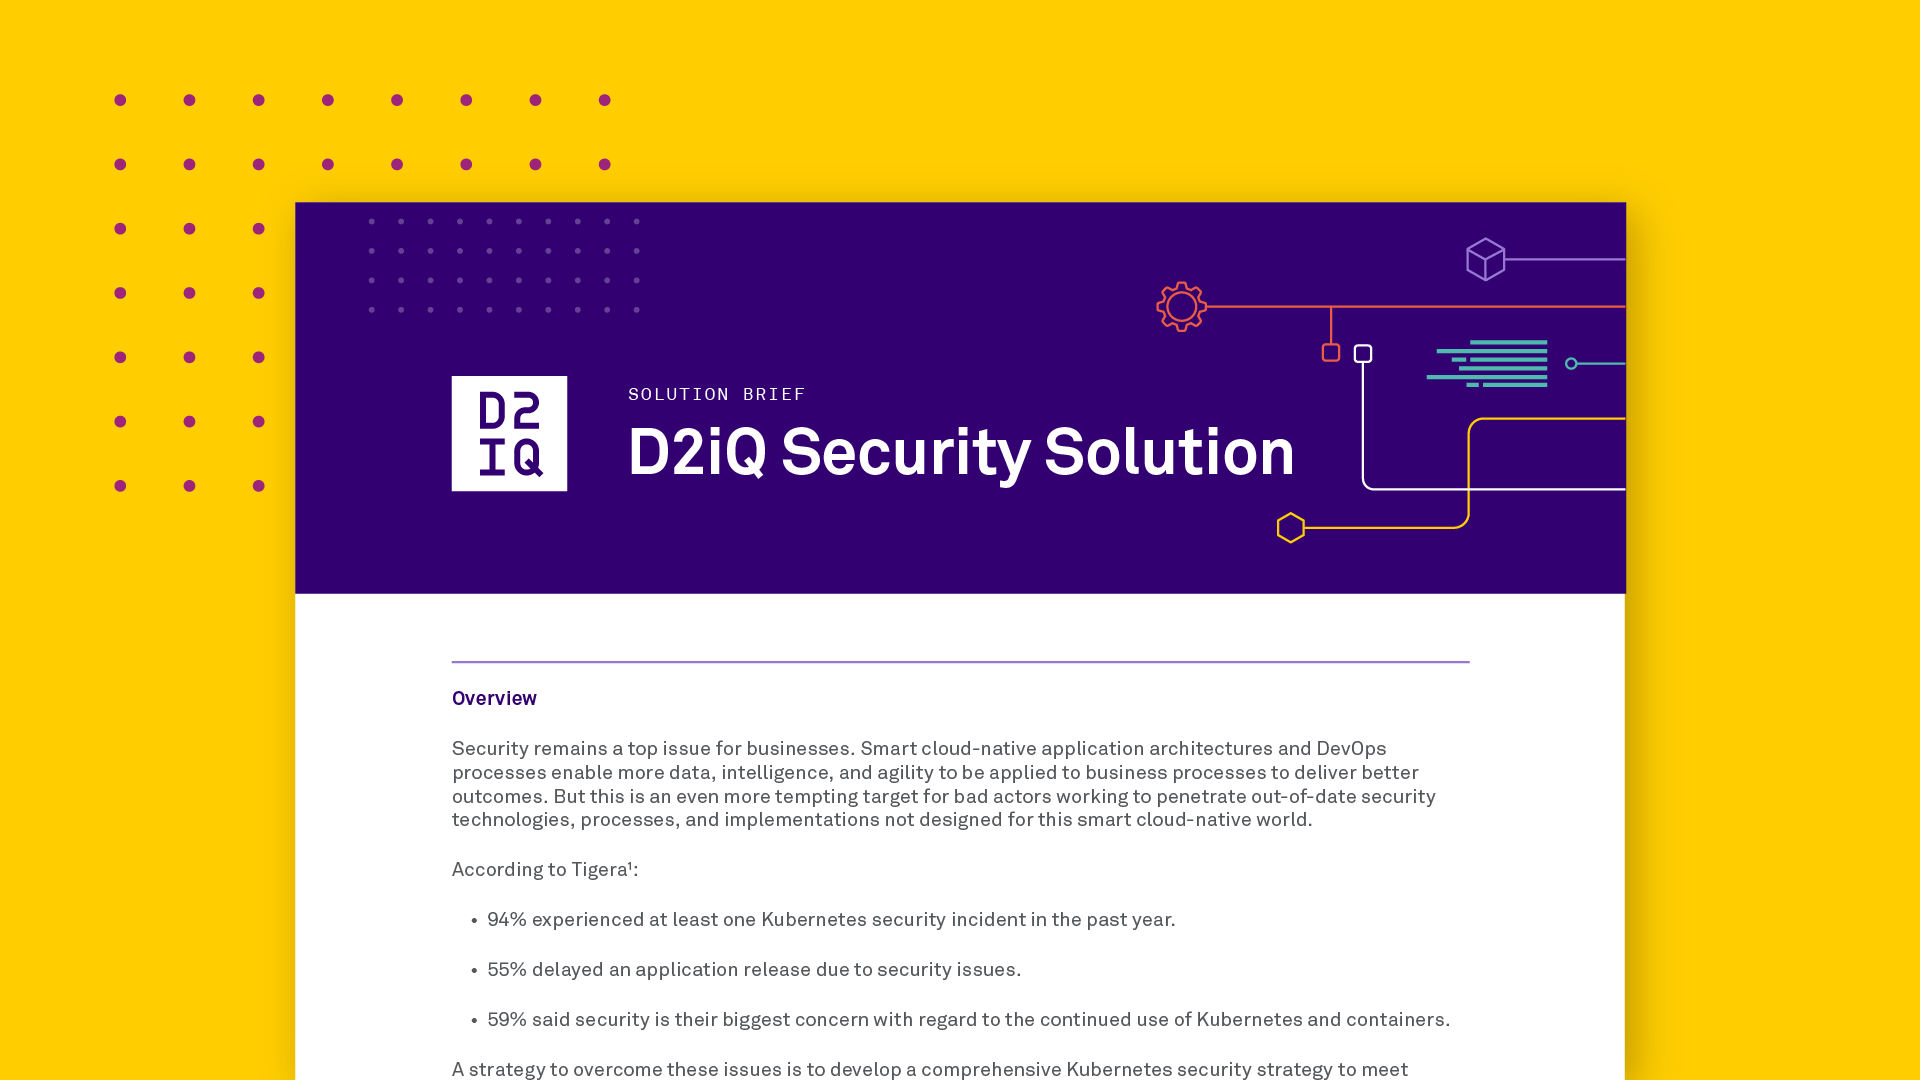 D2iQ Security Solution